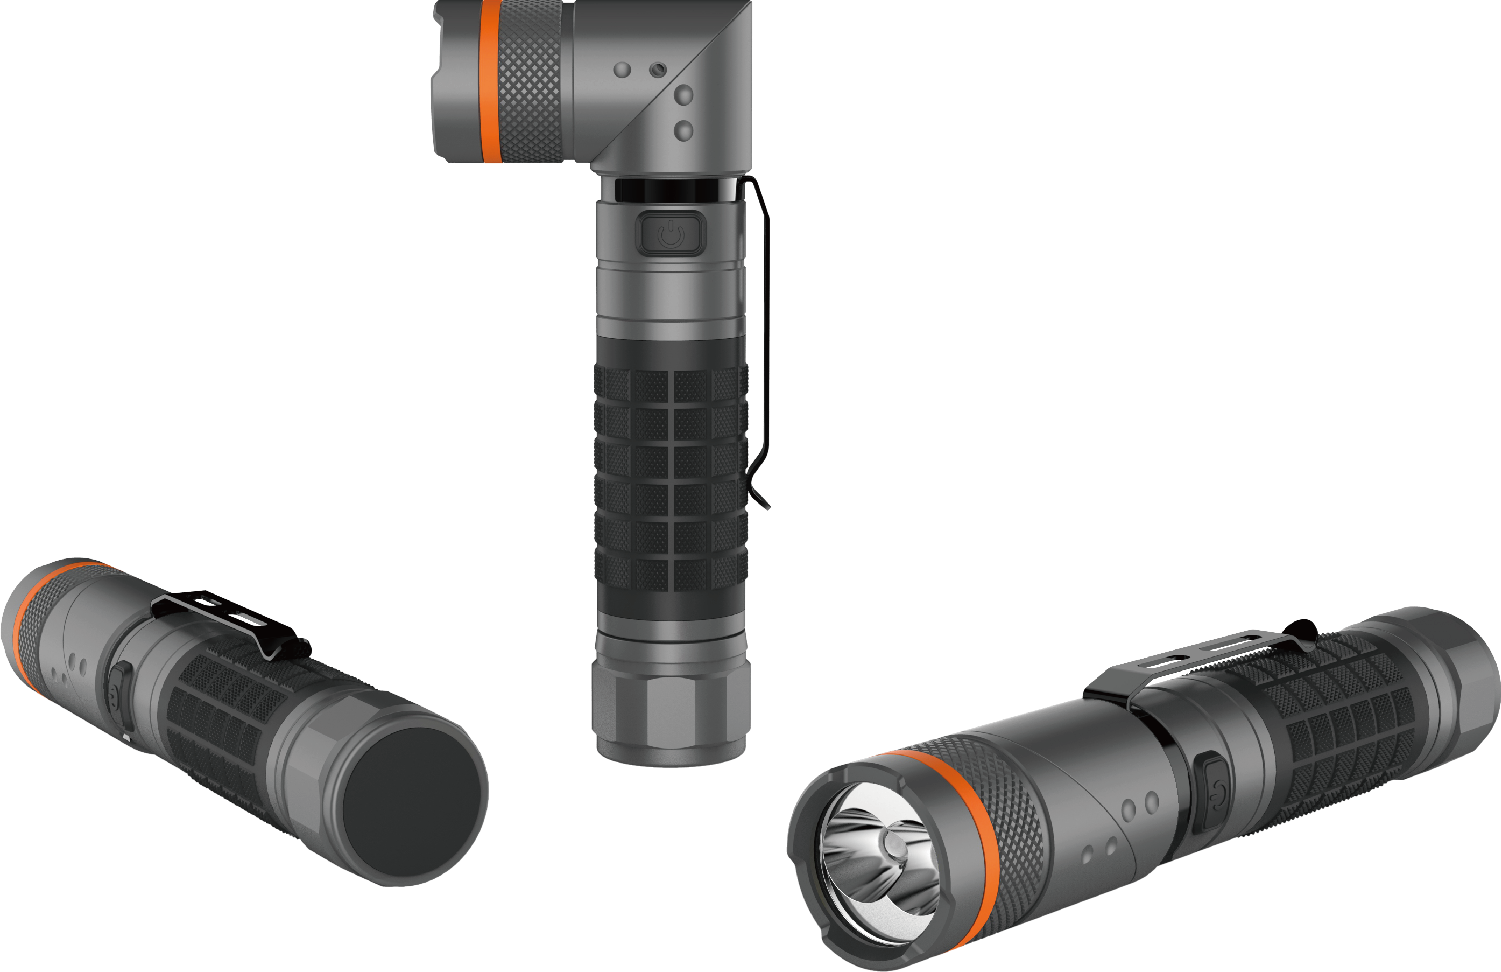 Does the multifunctional flashlight need to be charged?